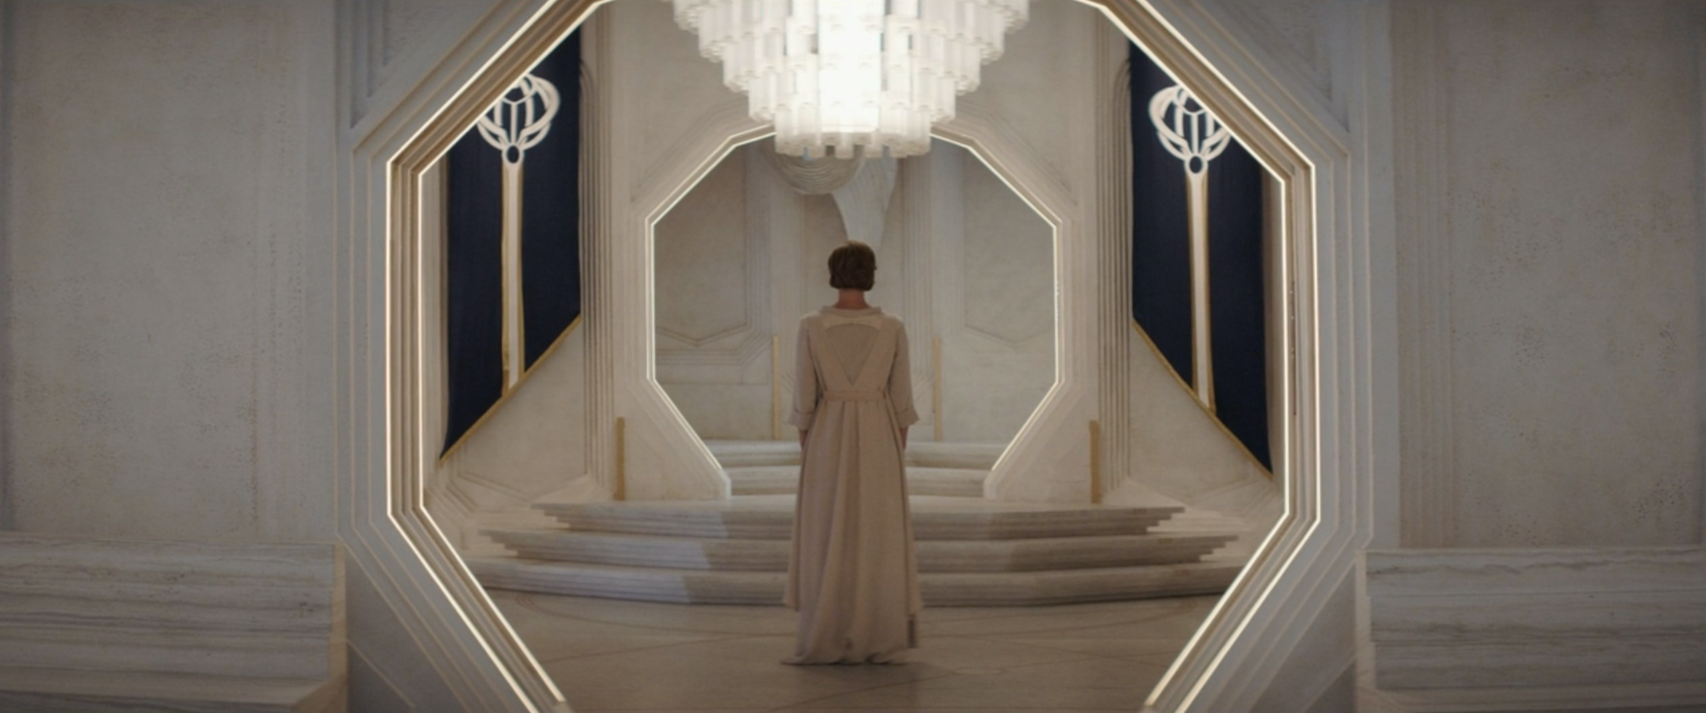 Mon Mothma, back turned to camera, standing in her home under a chandelier